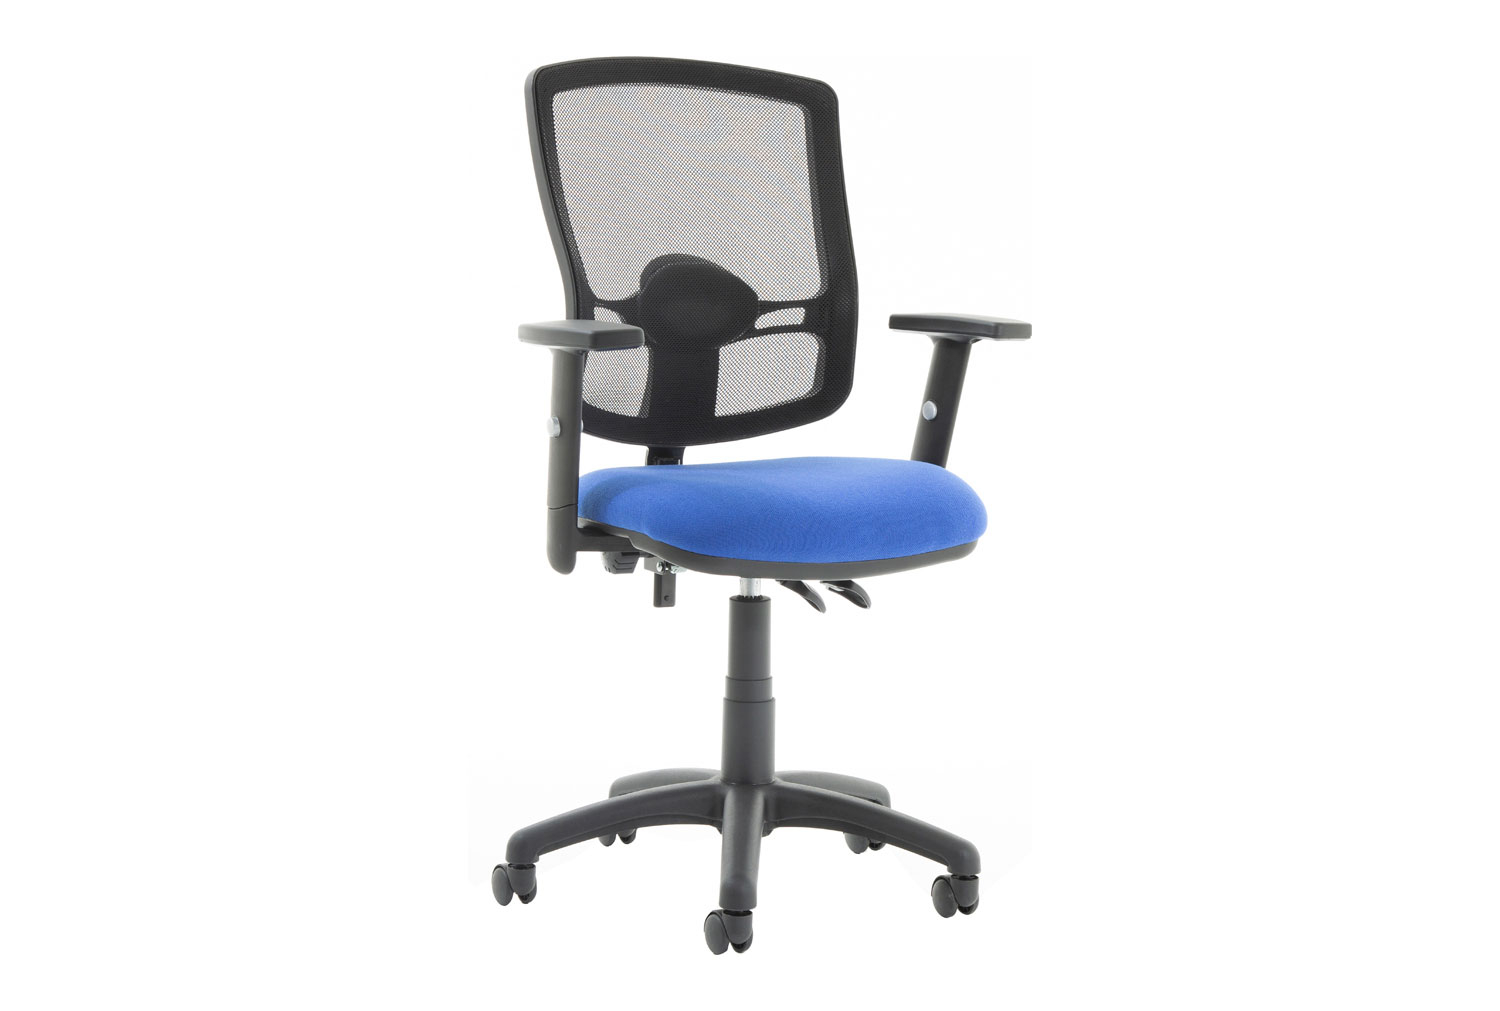 Lunar Plus 2 Lever Deluxe Mesh High Back Operator Office Chair (Adjustable Arms), Maringa Teal